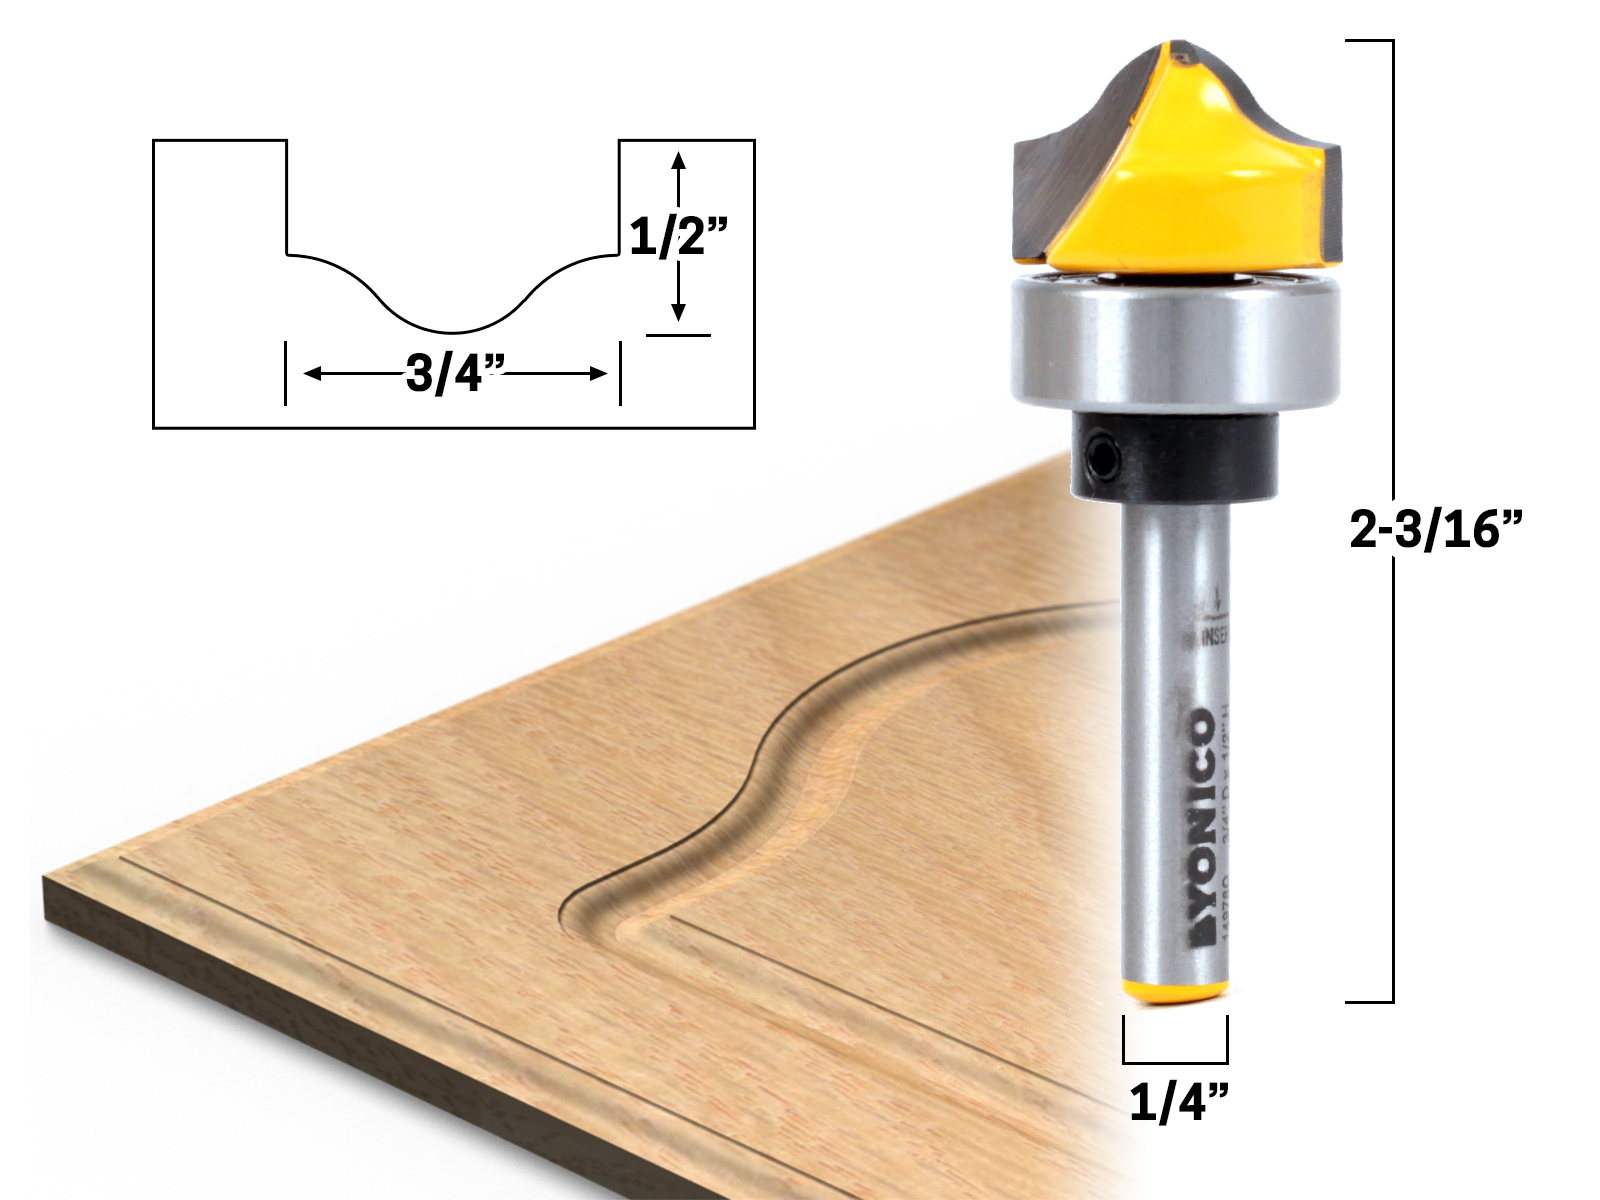 3/4" Faux Panel Ogee Groove Template Router Bit 1/4" Shank Yonico